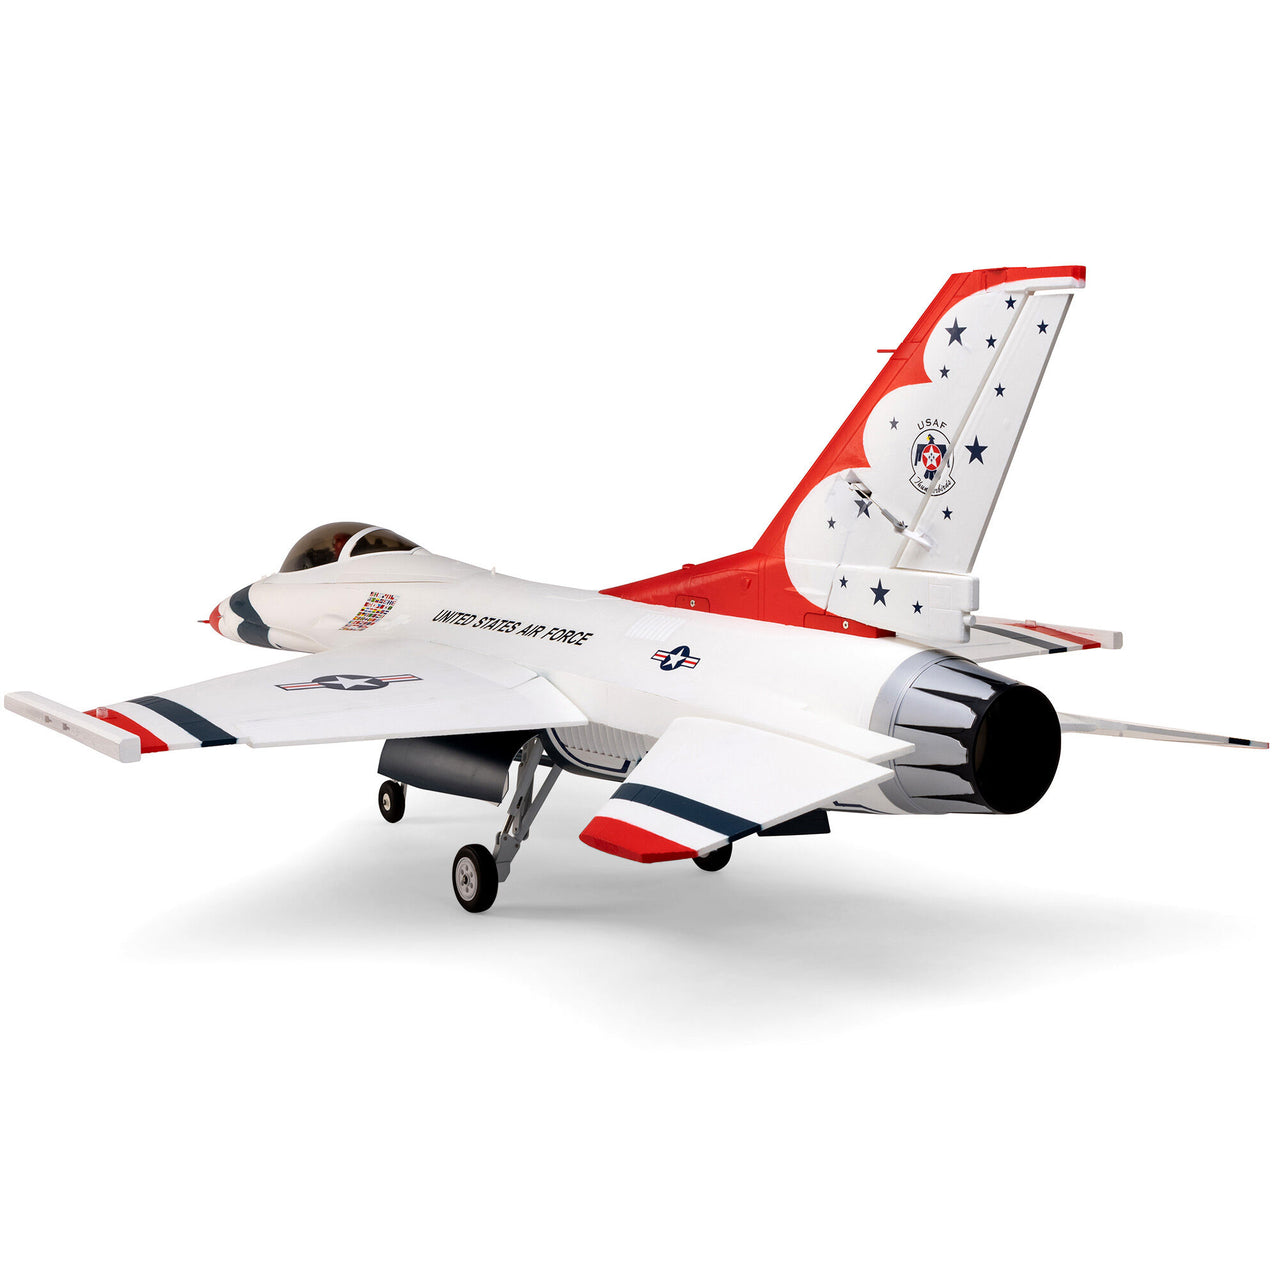 EFL87950 F-16 Thunderbirds 80mm EDF BNF Basic with AS3X and SAFE Select